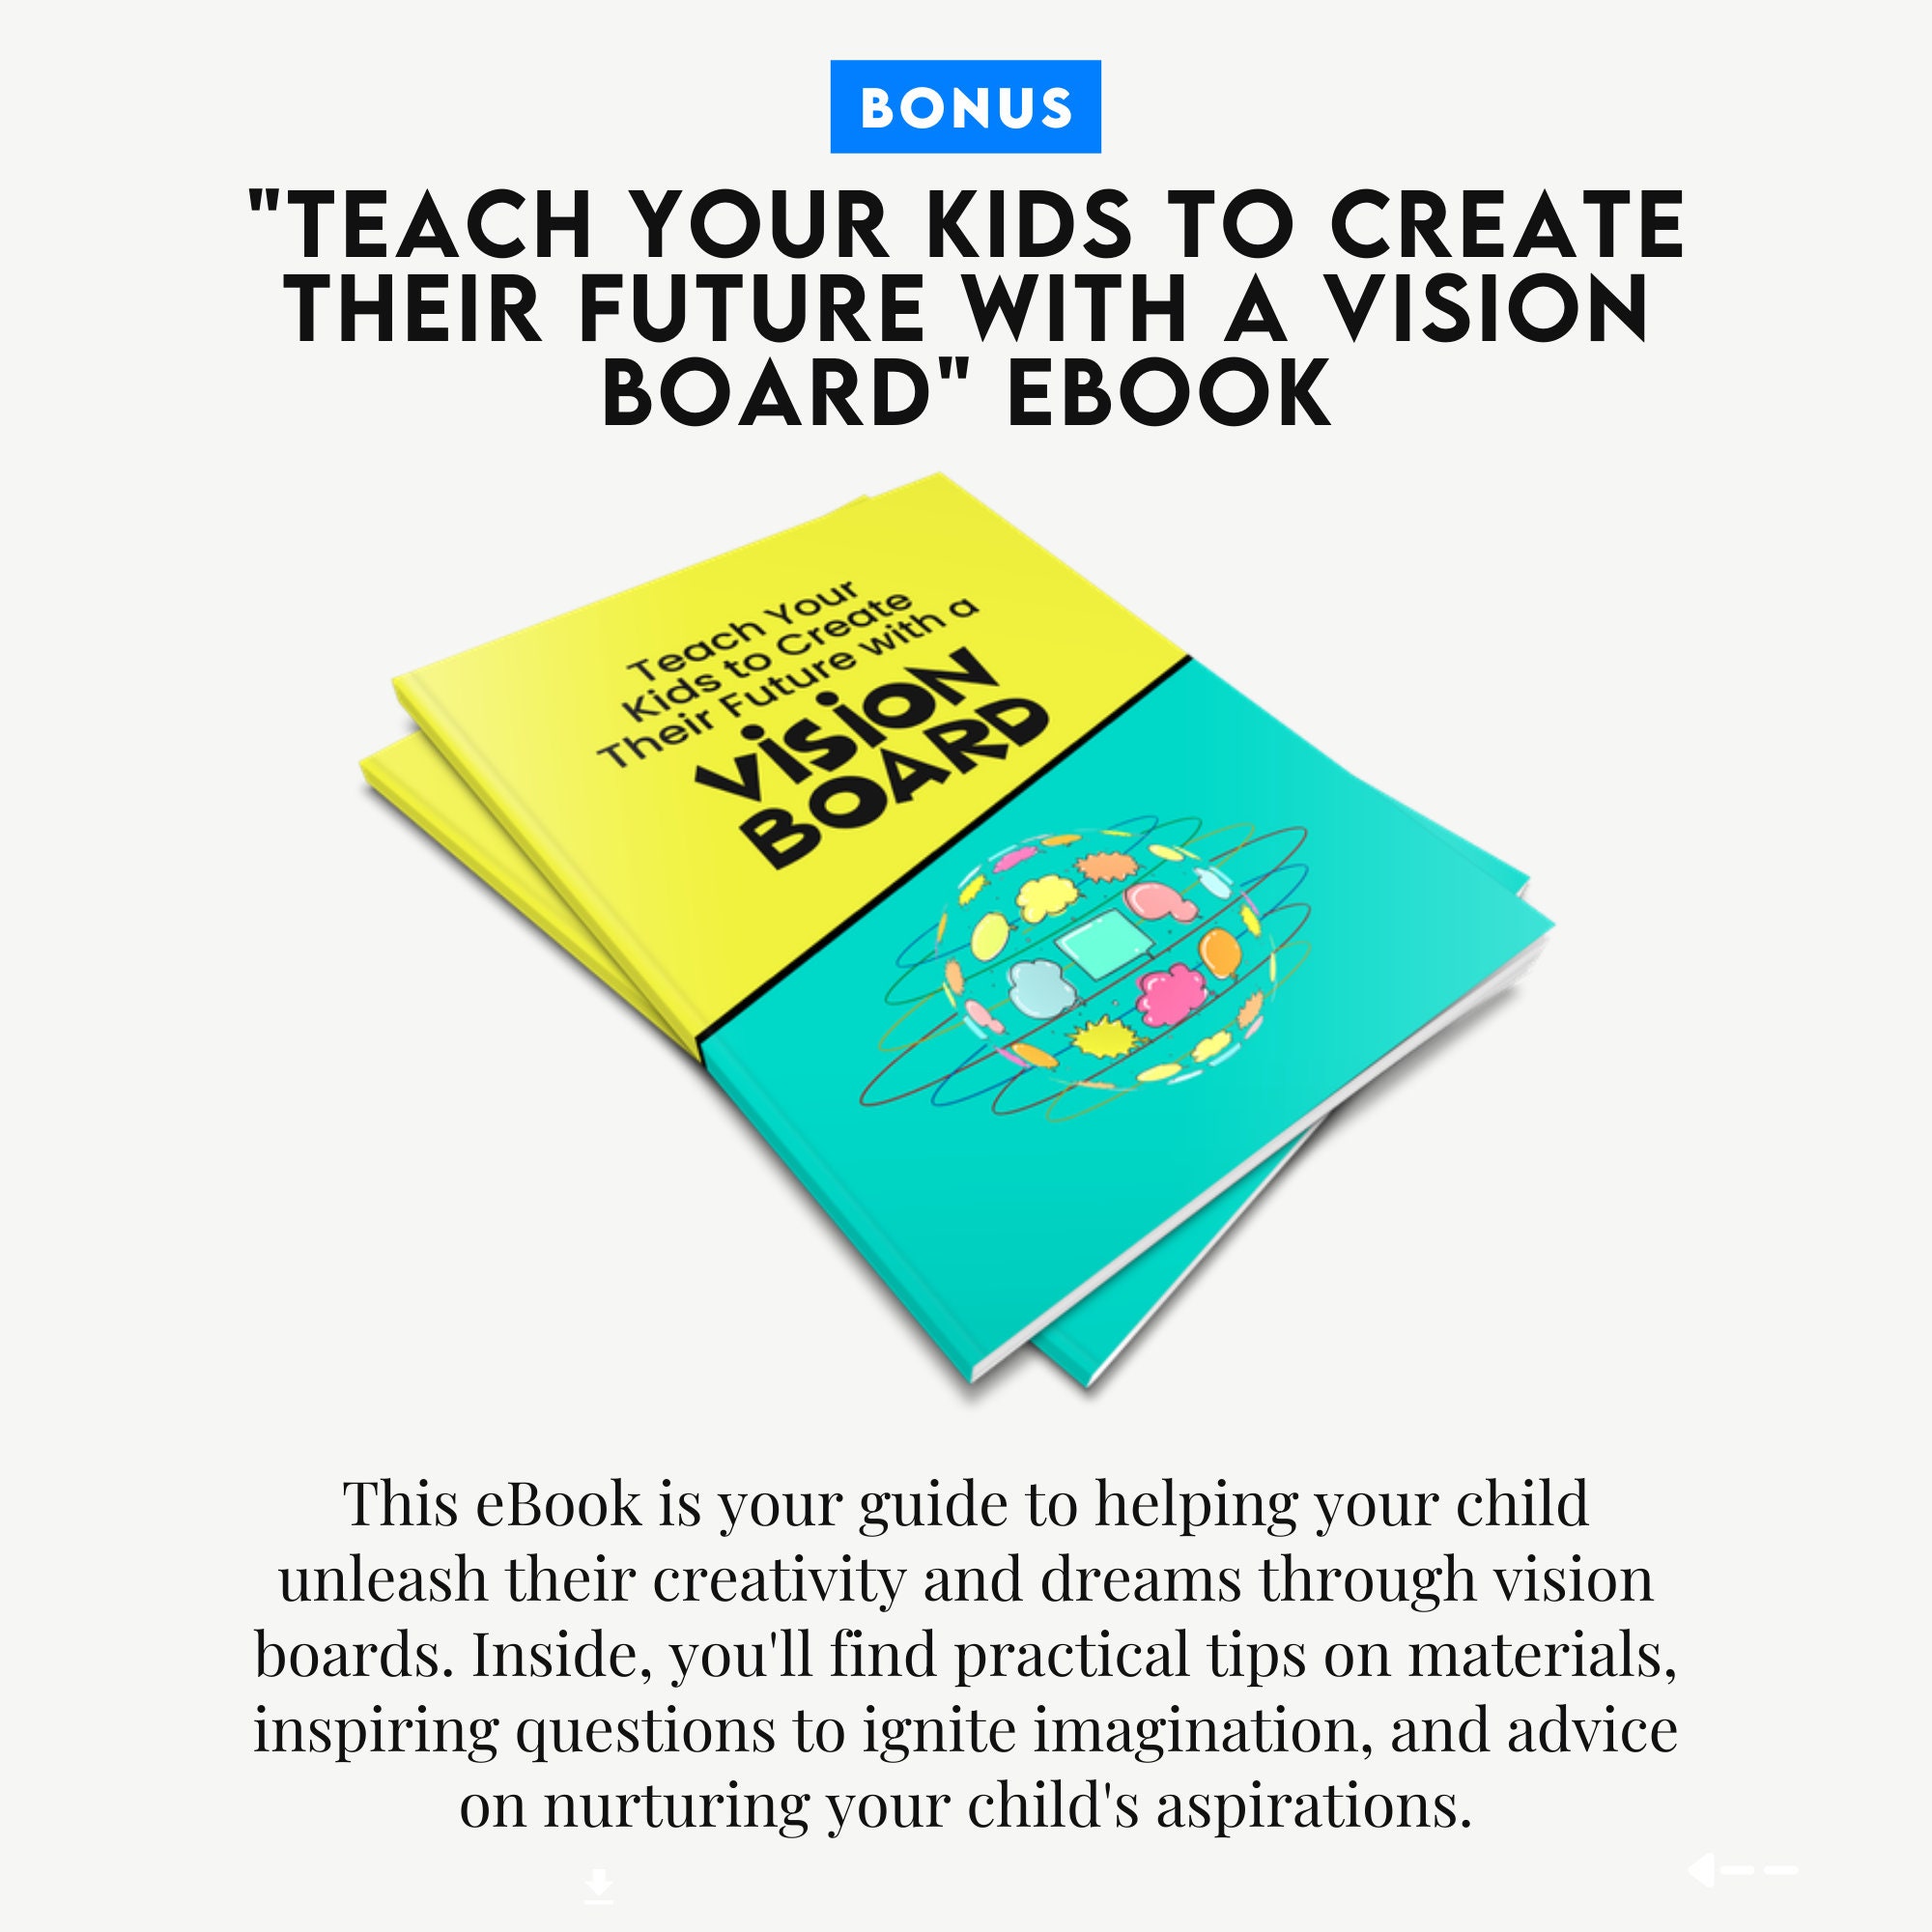 Stream Read^^ ✨ Vision Board Clip Art Book For Black Boys: Vision Board Kit  for Kids Supplies With Pictur by Abubakarisah